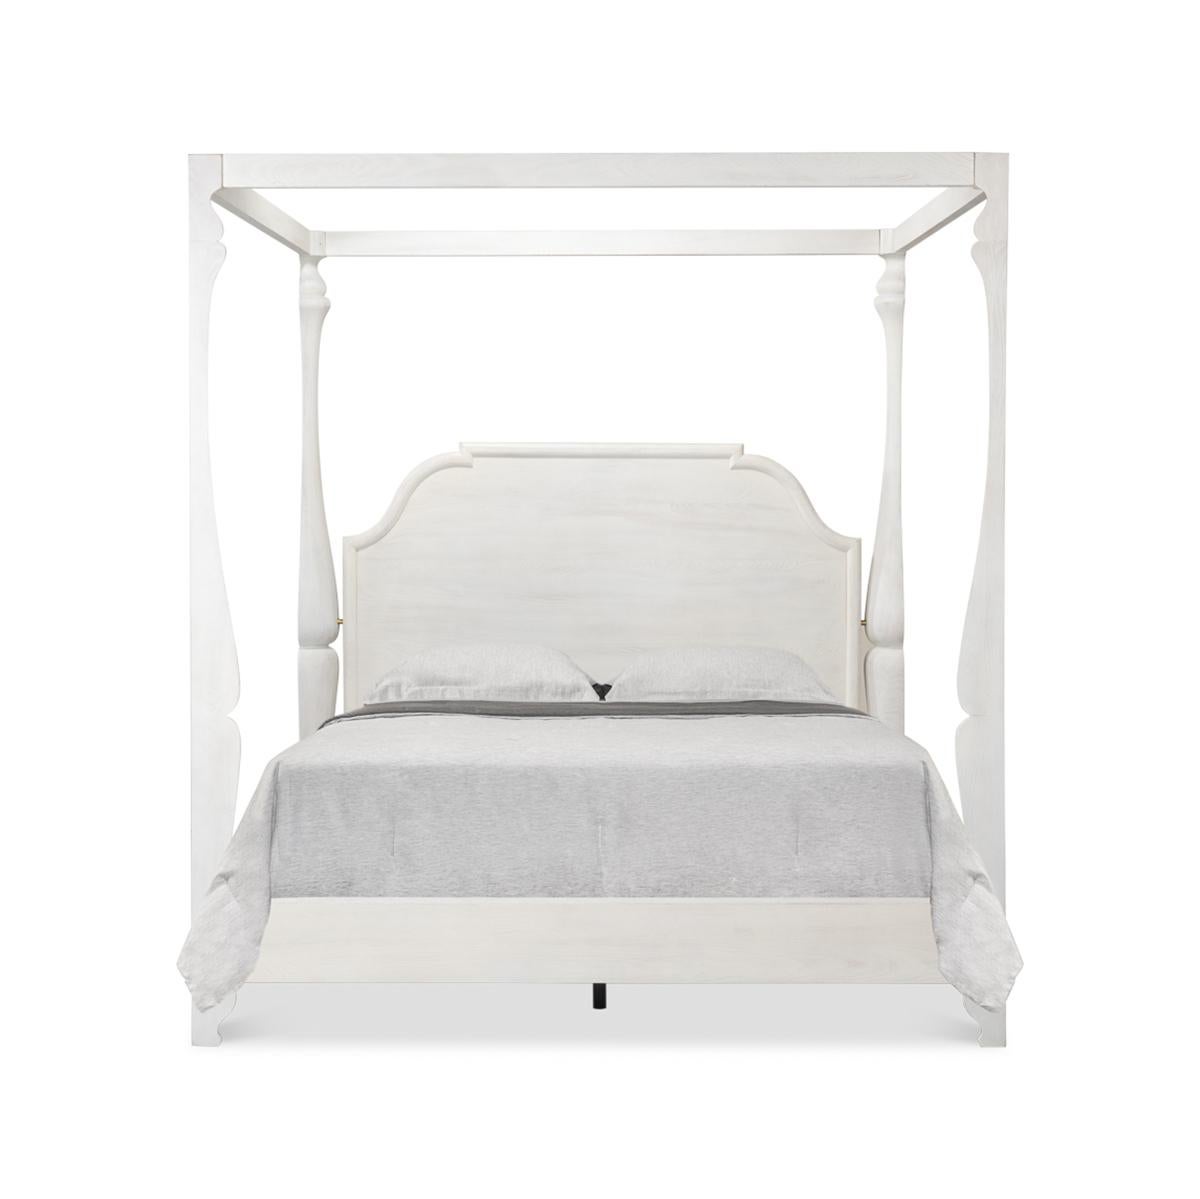 A European-style canopy bed with our bungalow white finish. This bed features beautifully carved posts crafted from beechwood and accented with iron and brass. 

Dimensions: 89